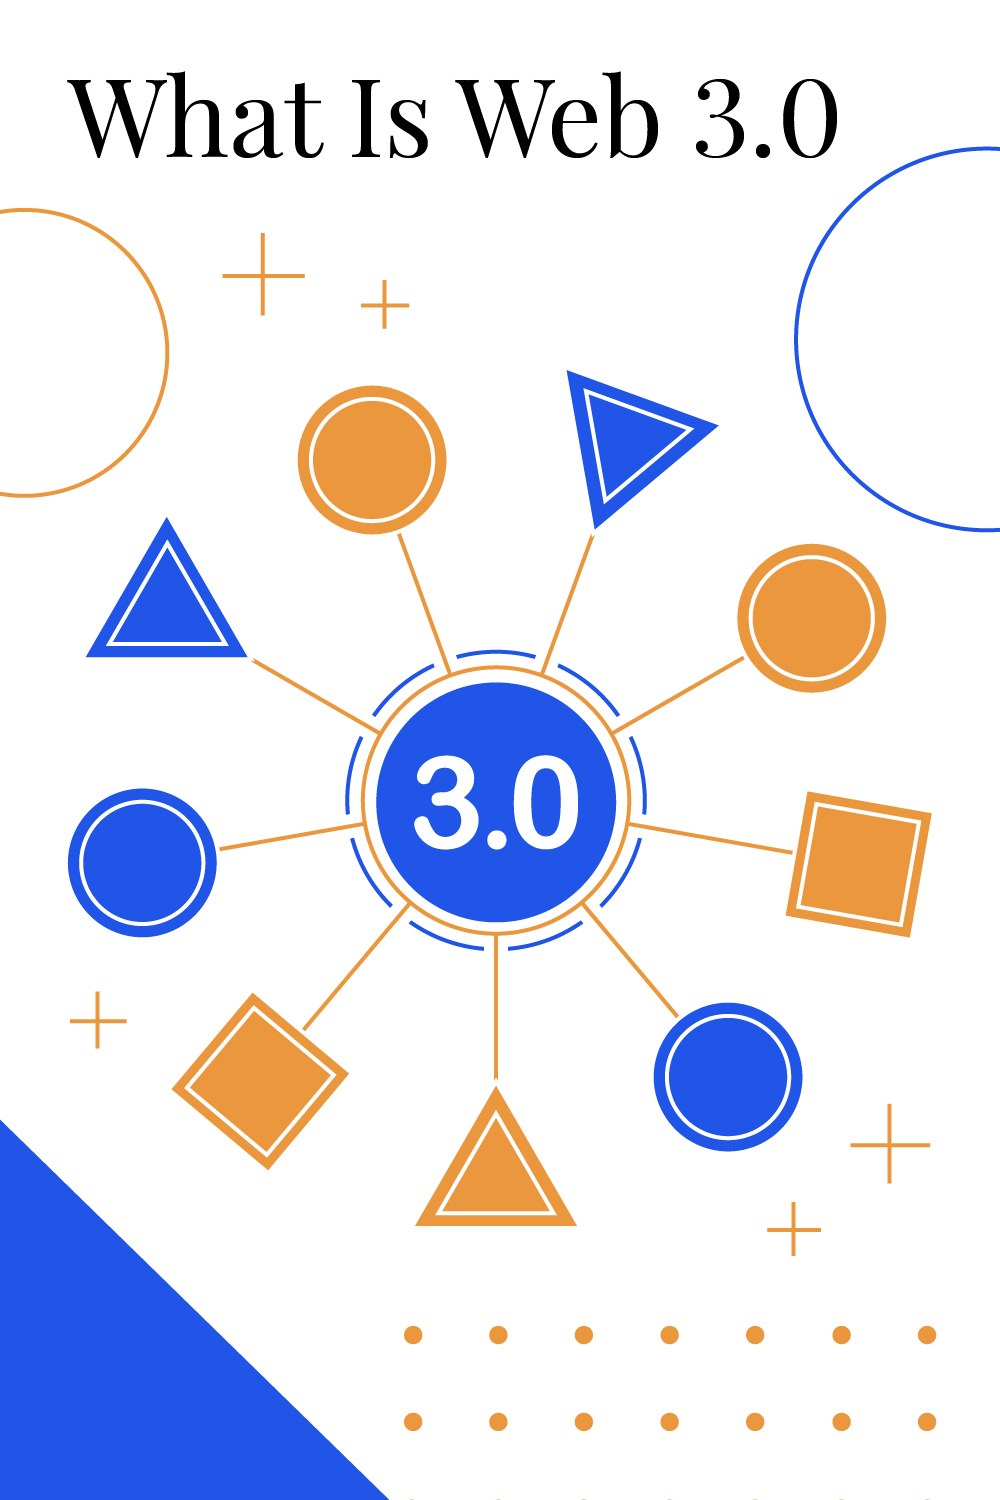 What Is Web 3.0? | Definition & Why It Matters